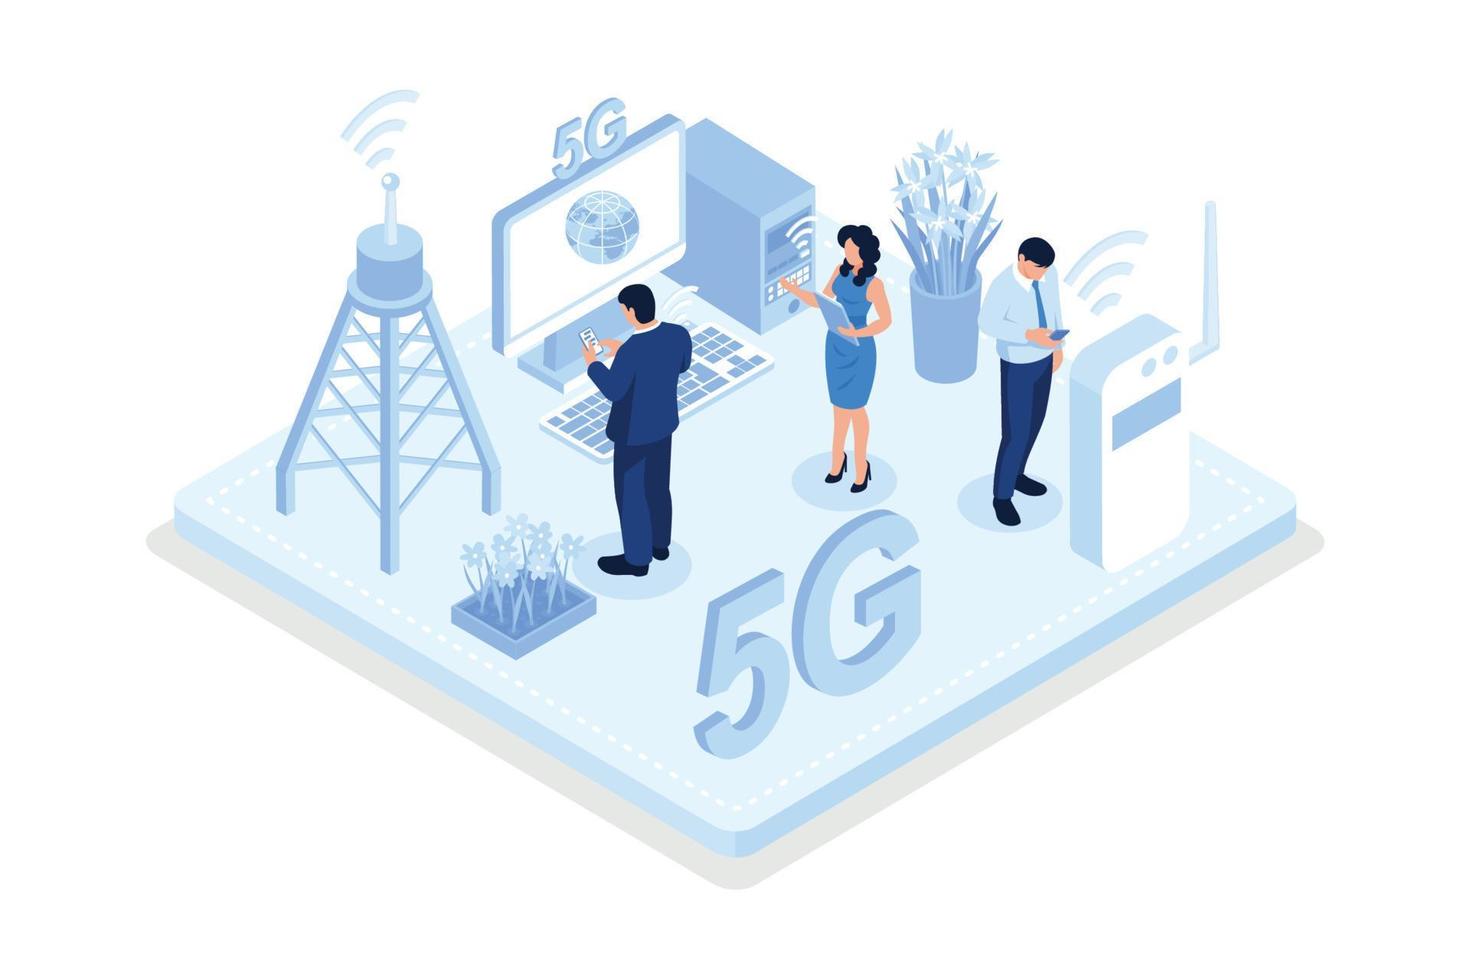 People Character Connecting Devices with New Generation 5g Technology Network. High-speed Mobile Internet and Internet of Things Concept, isometric vector modern illustration